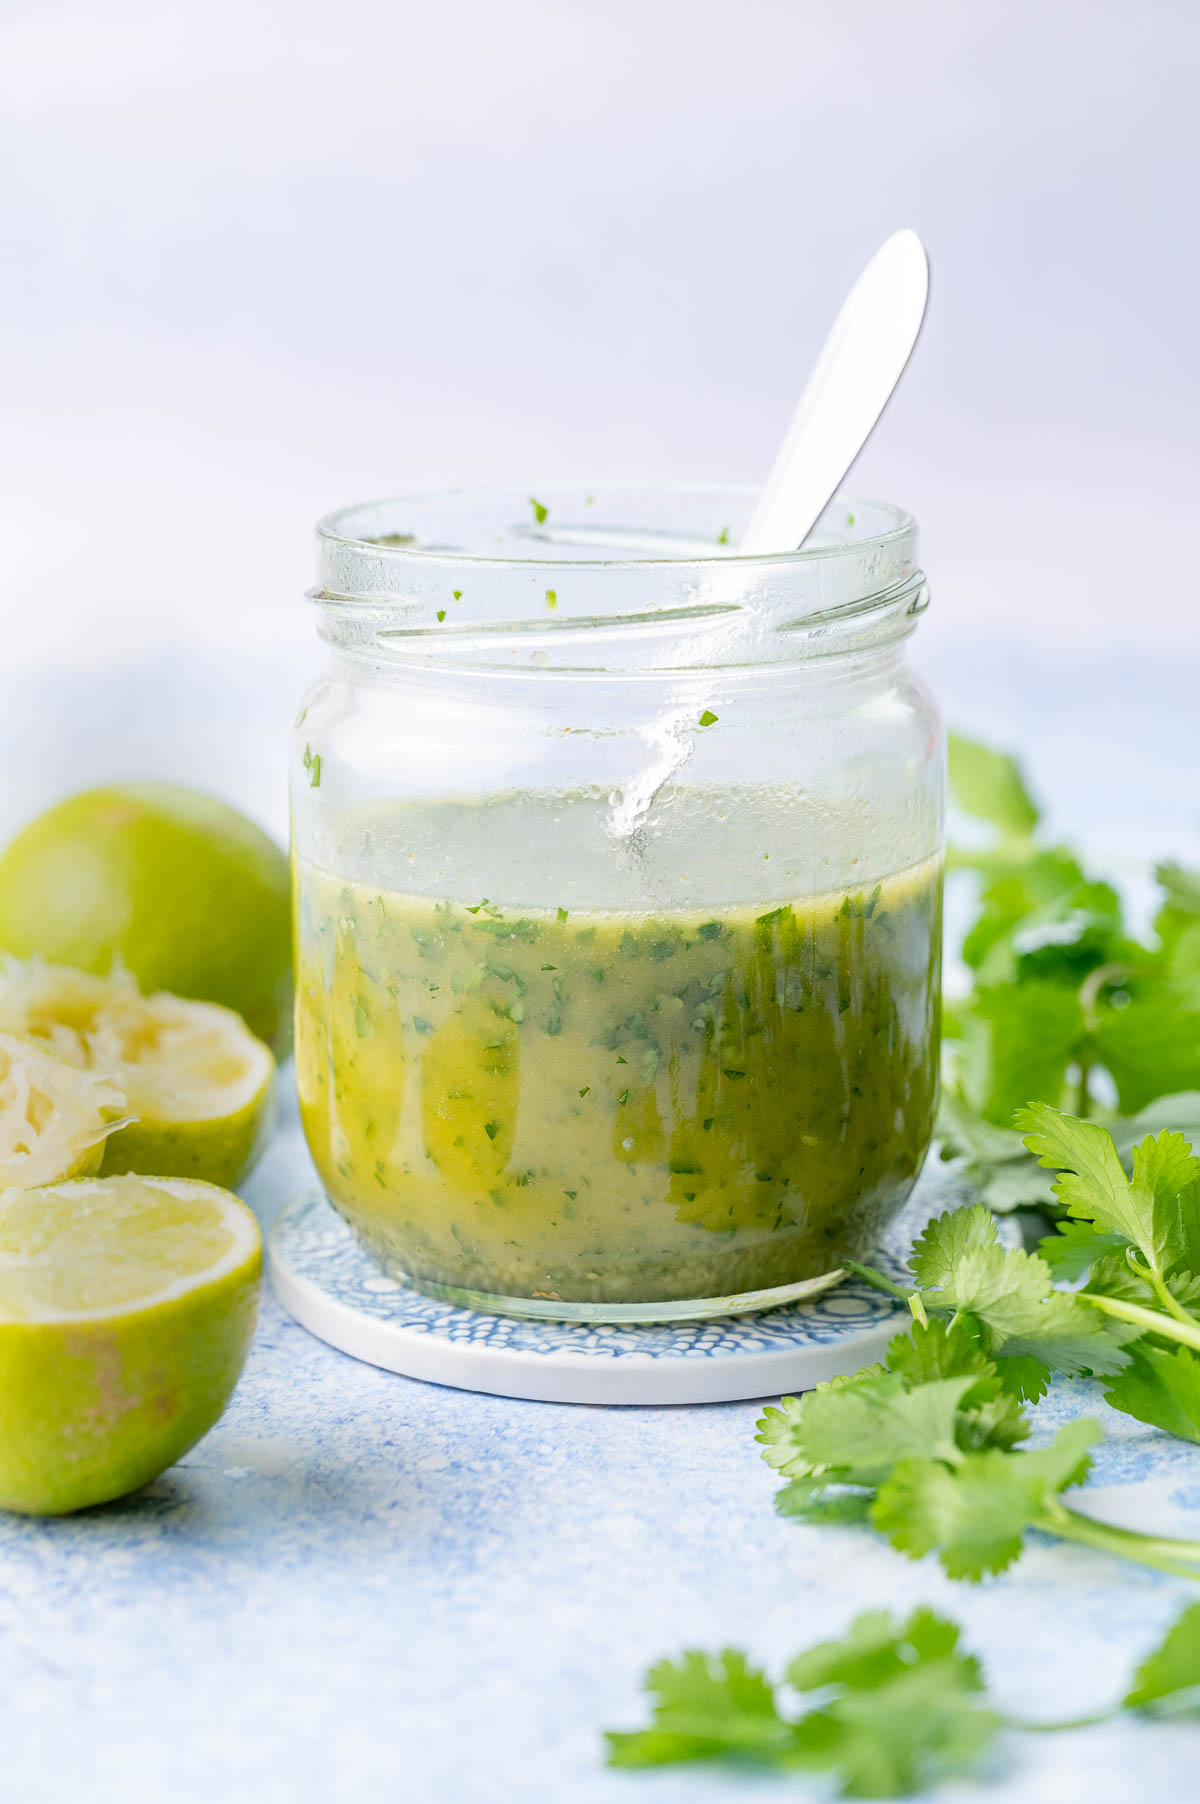 Cilantro lime vinaigrette in a jar. Limes and cilantro in the background.